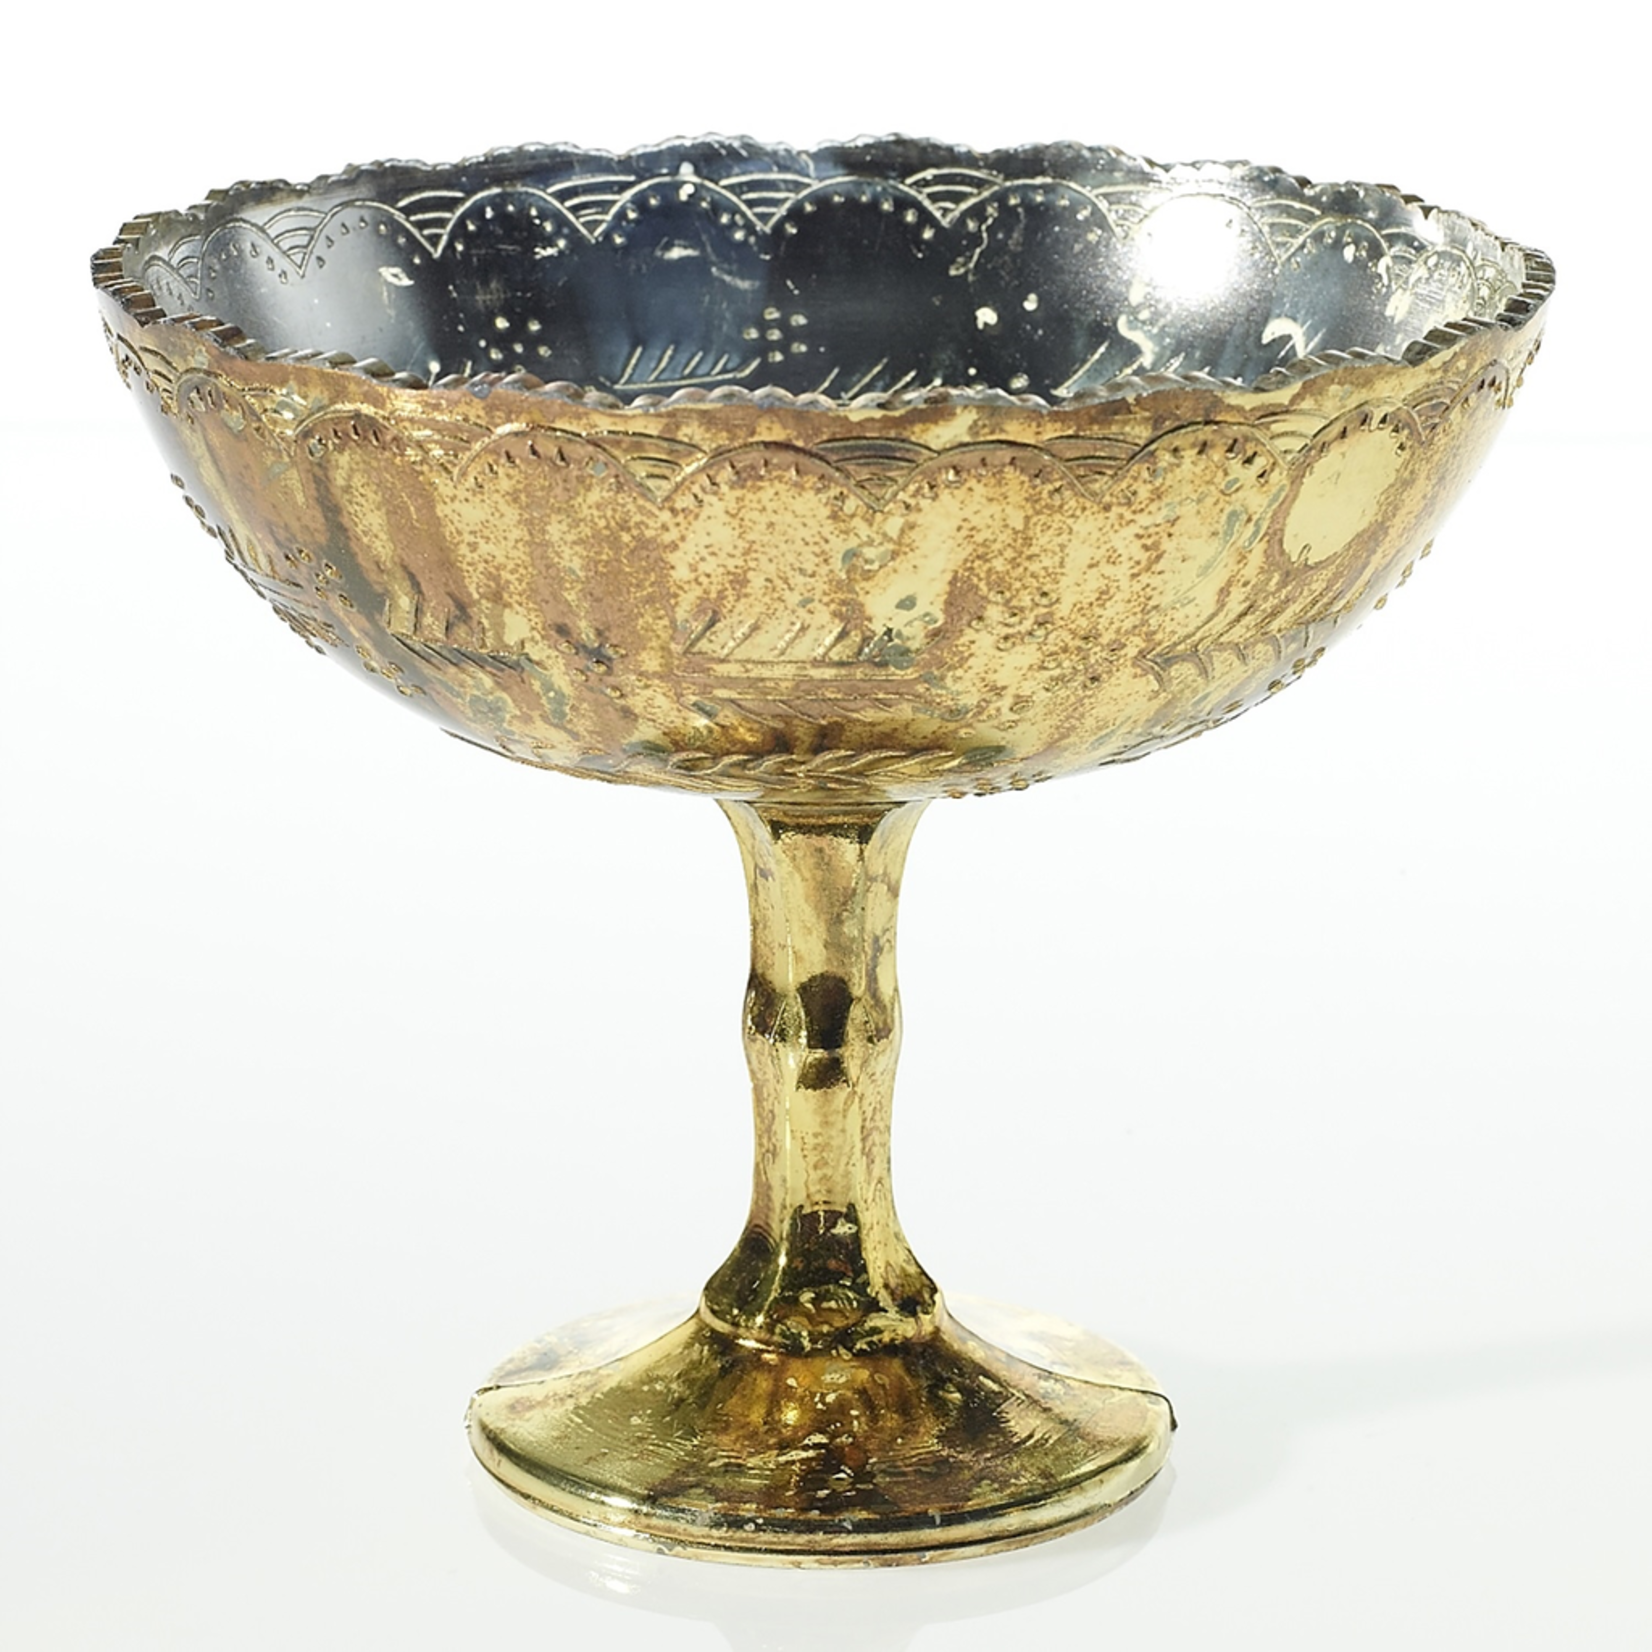 7”h x 8” Desiray Compote Gold, GLASS